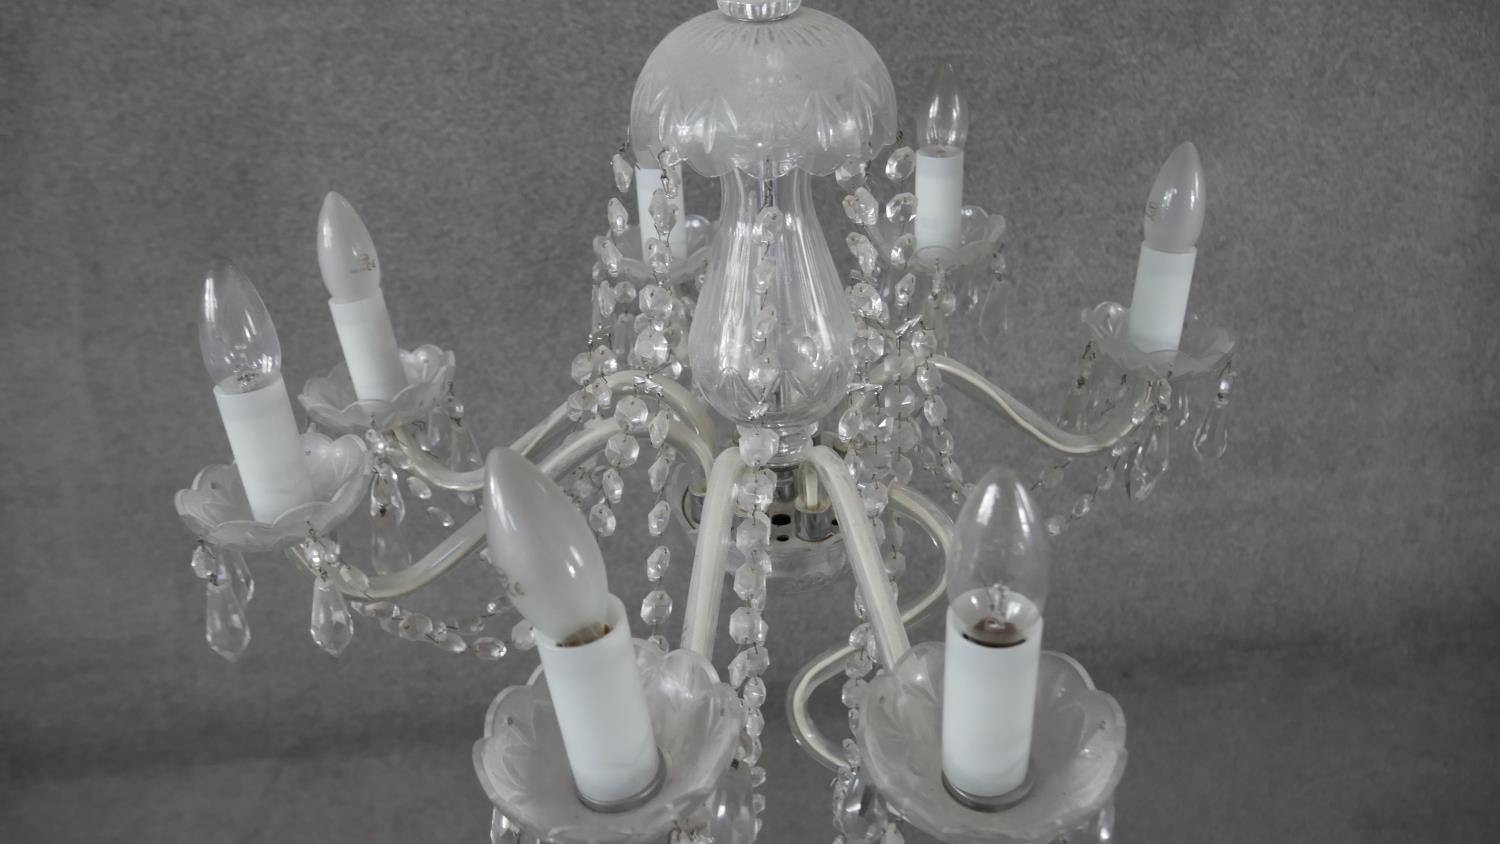 Two vintage cut crystal chandeliers, one eight (branch broken) branch and one five branch with - Image 5 of 6